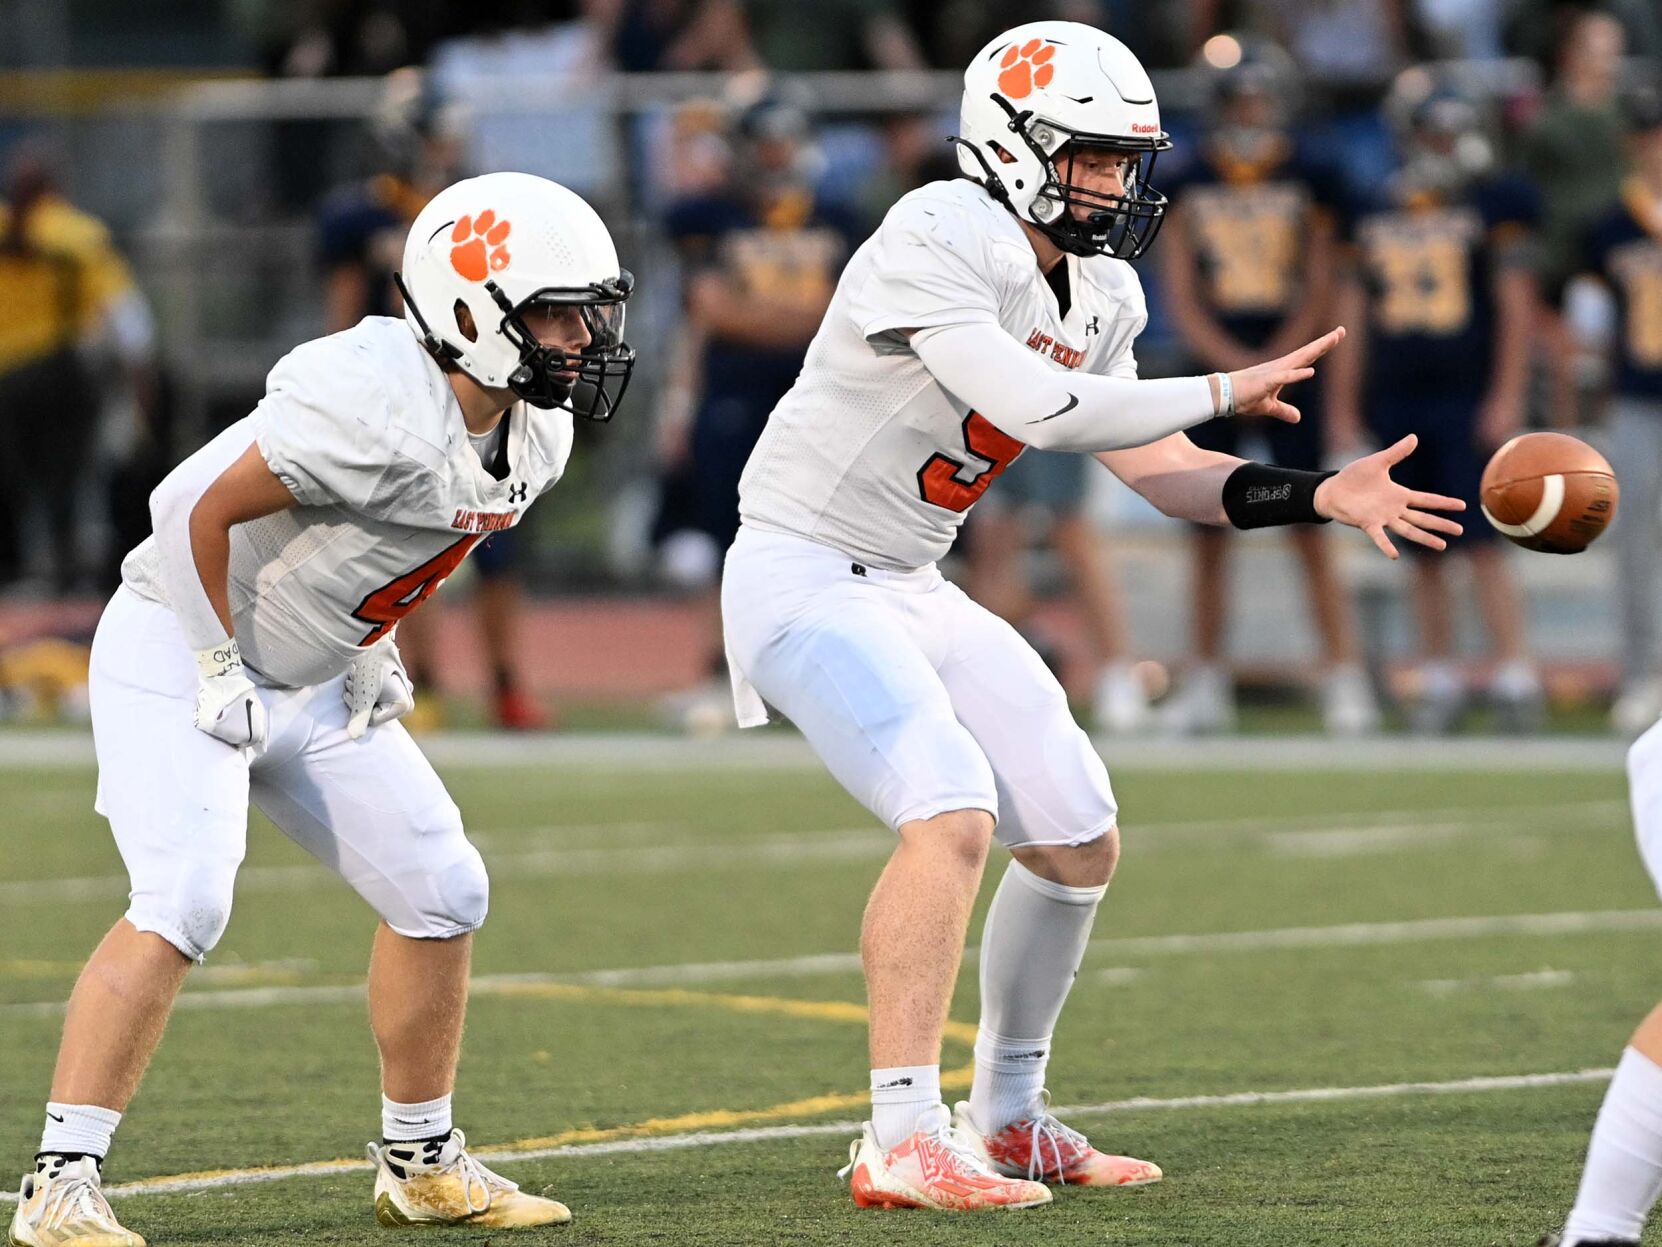 East Pennsboro Clinches Colonial Division Title, Quarterback Keith Oates Sets Passing Record